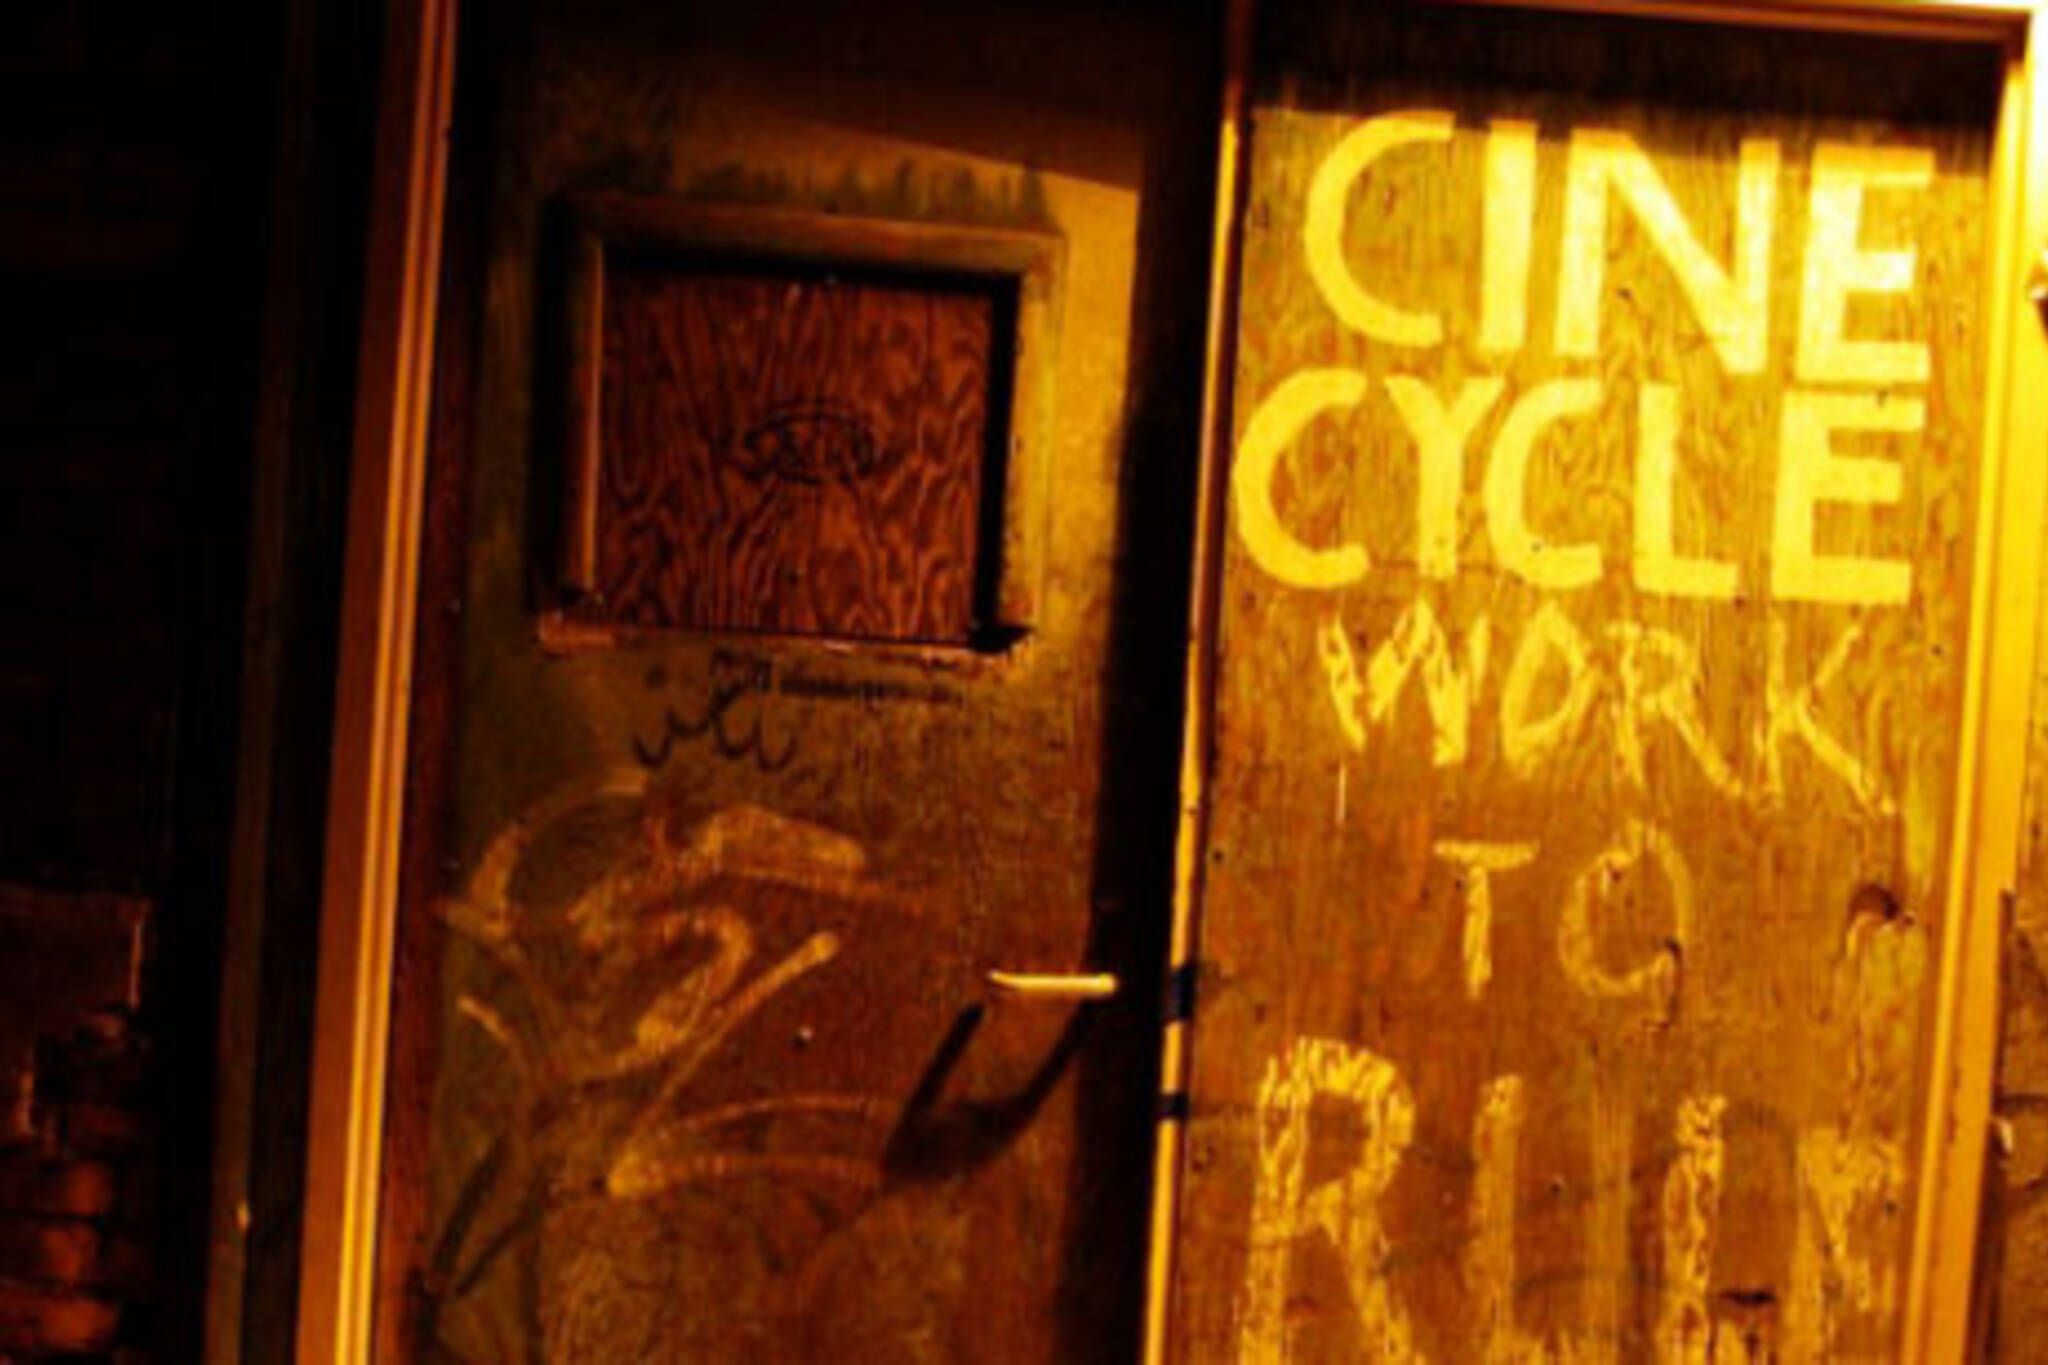 Cinecycle